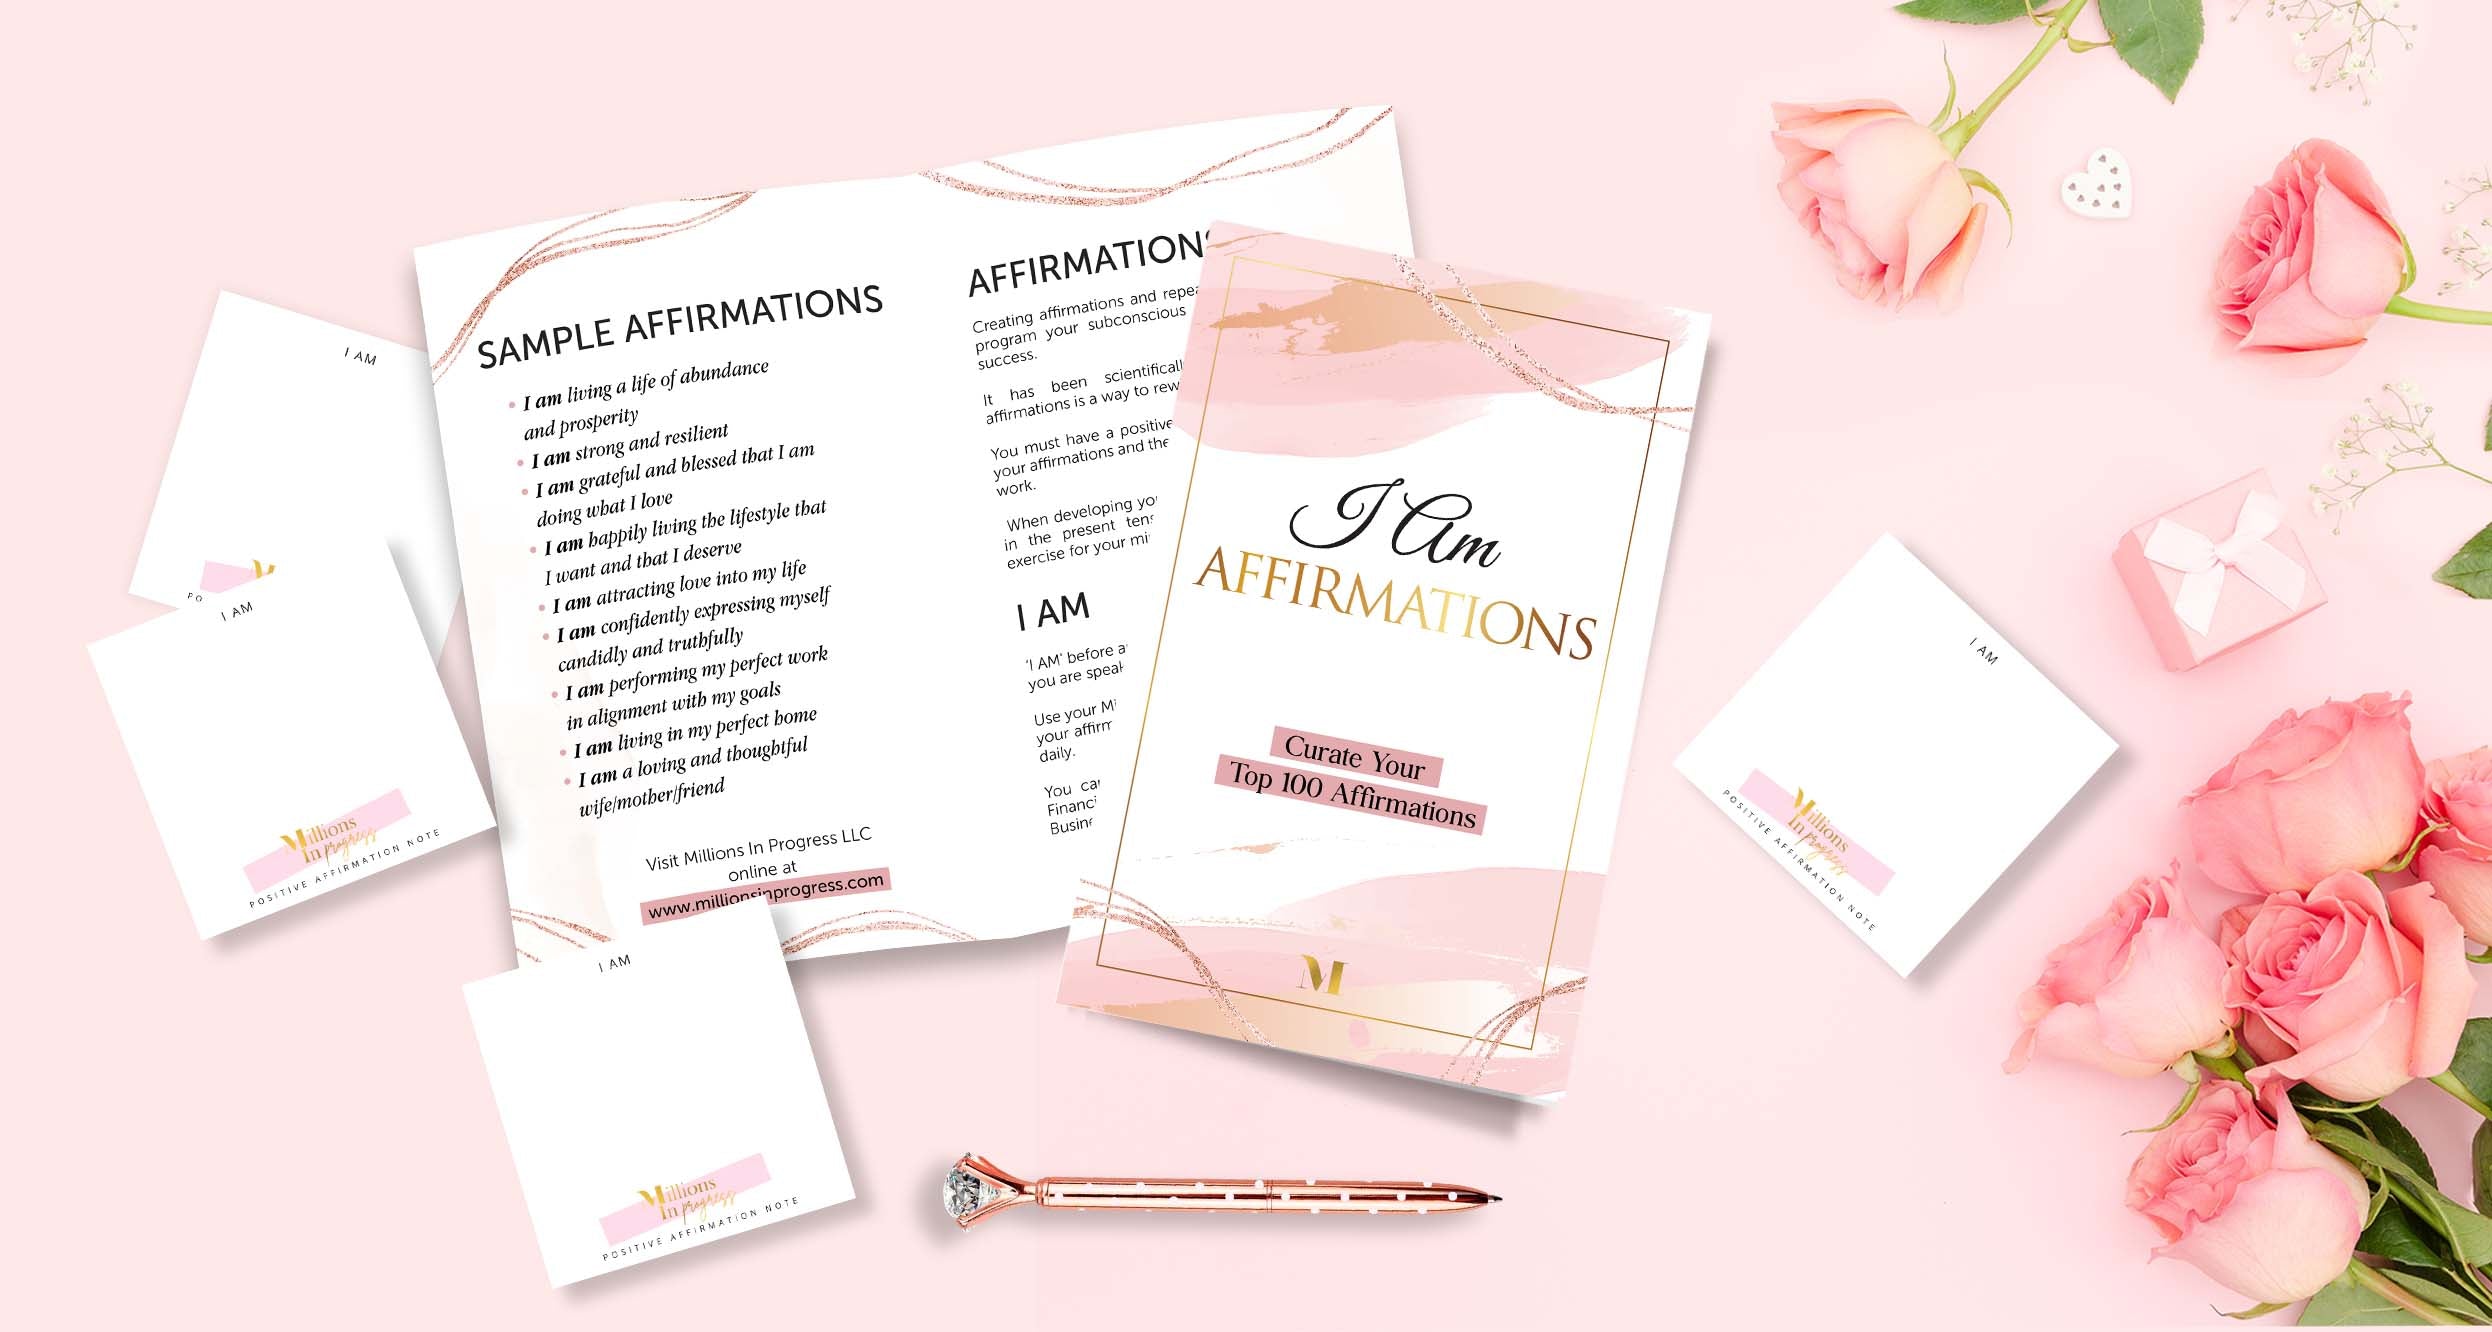 Affirmation Set  // Curate Your Top 100 Affirmations //  "I AM" Sticky Notes Set of 100 // Diamond Rhinestone Pen // Affirmation Guide Bi-Fold